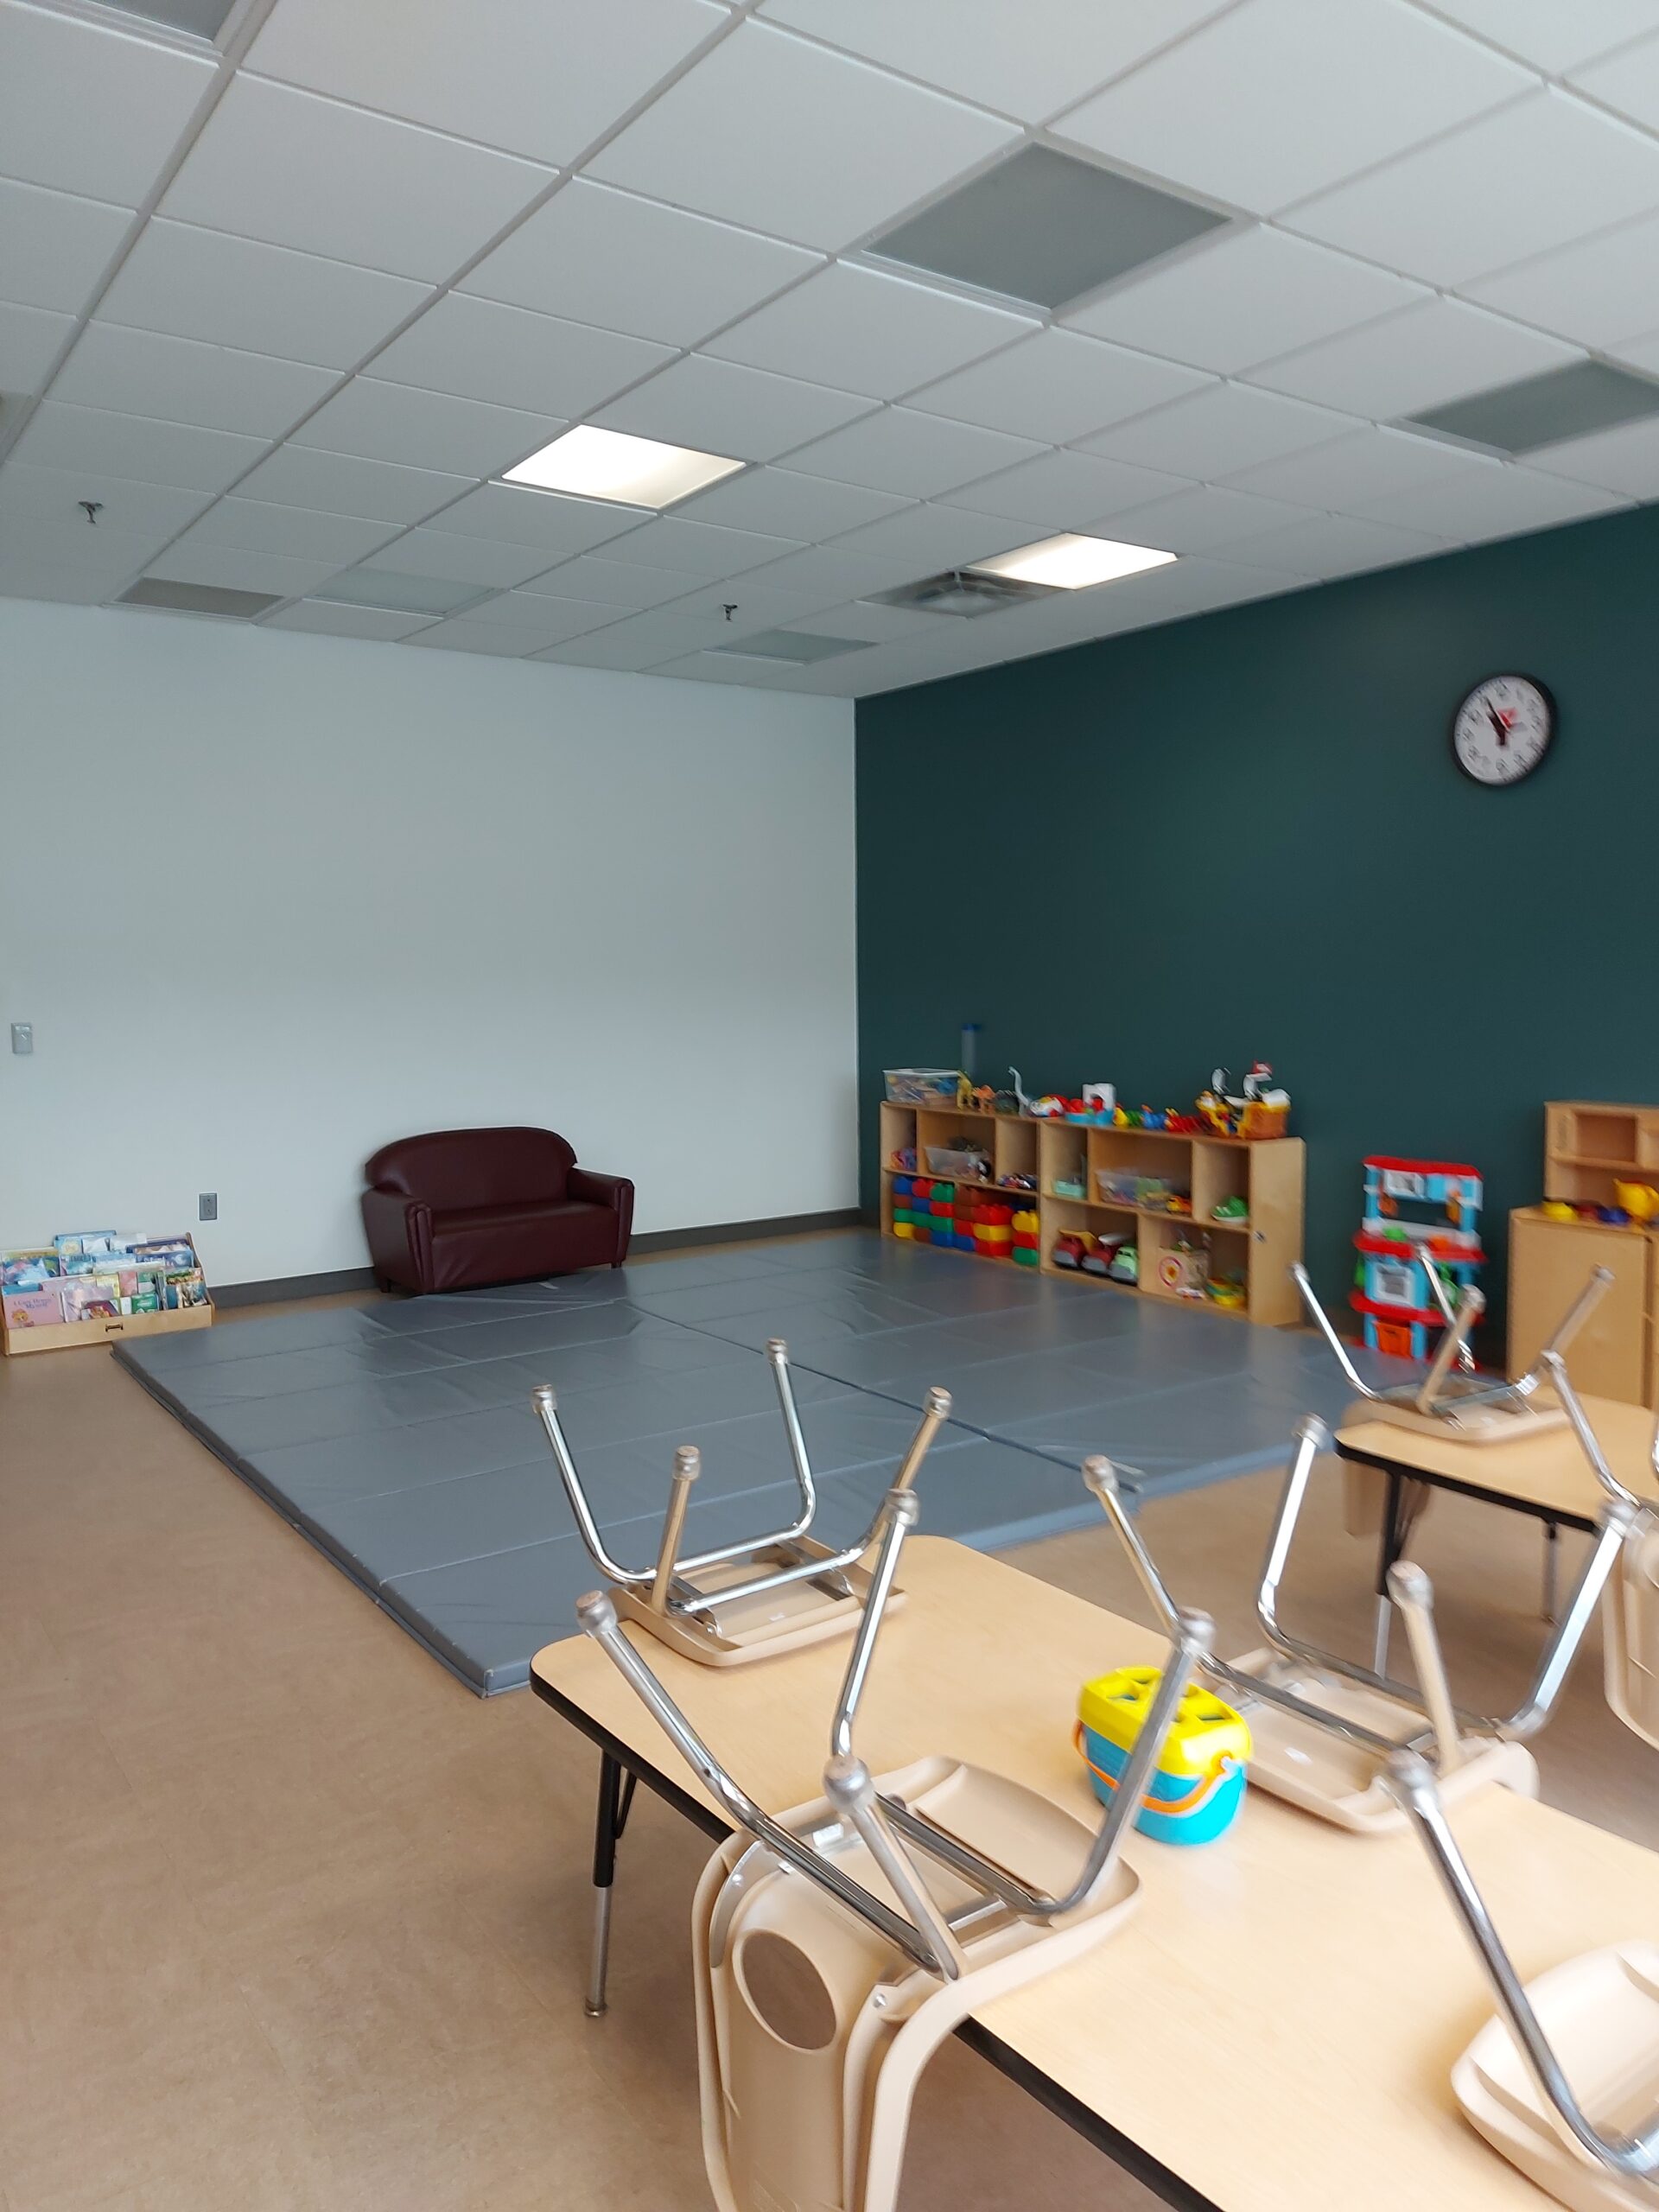 A wide angle view of a birthday party room at the YMCA